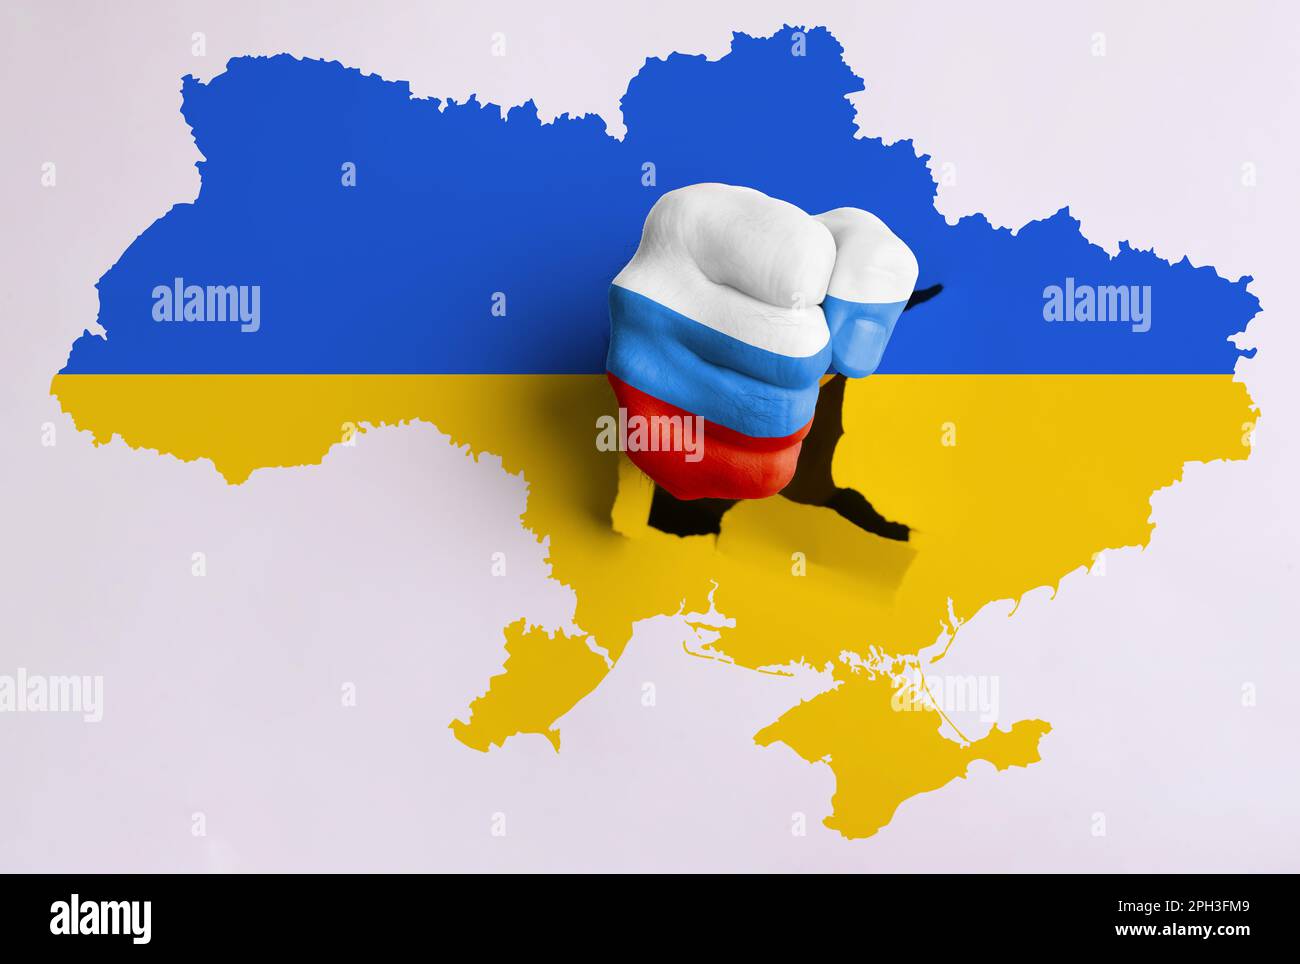 Russian aggression against Ukraine. Man breaking through map of Ukraine with fist painted in colors of Russian flag Stock Photo